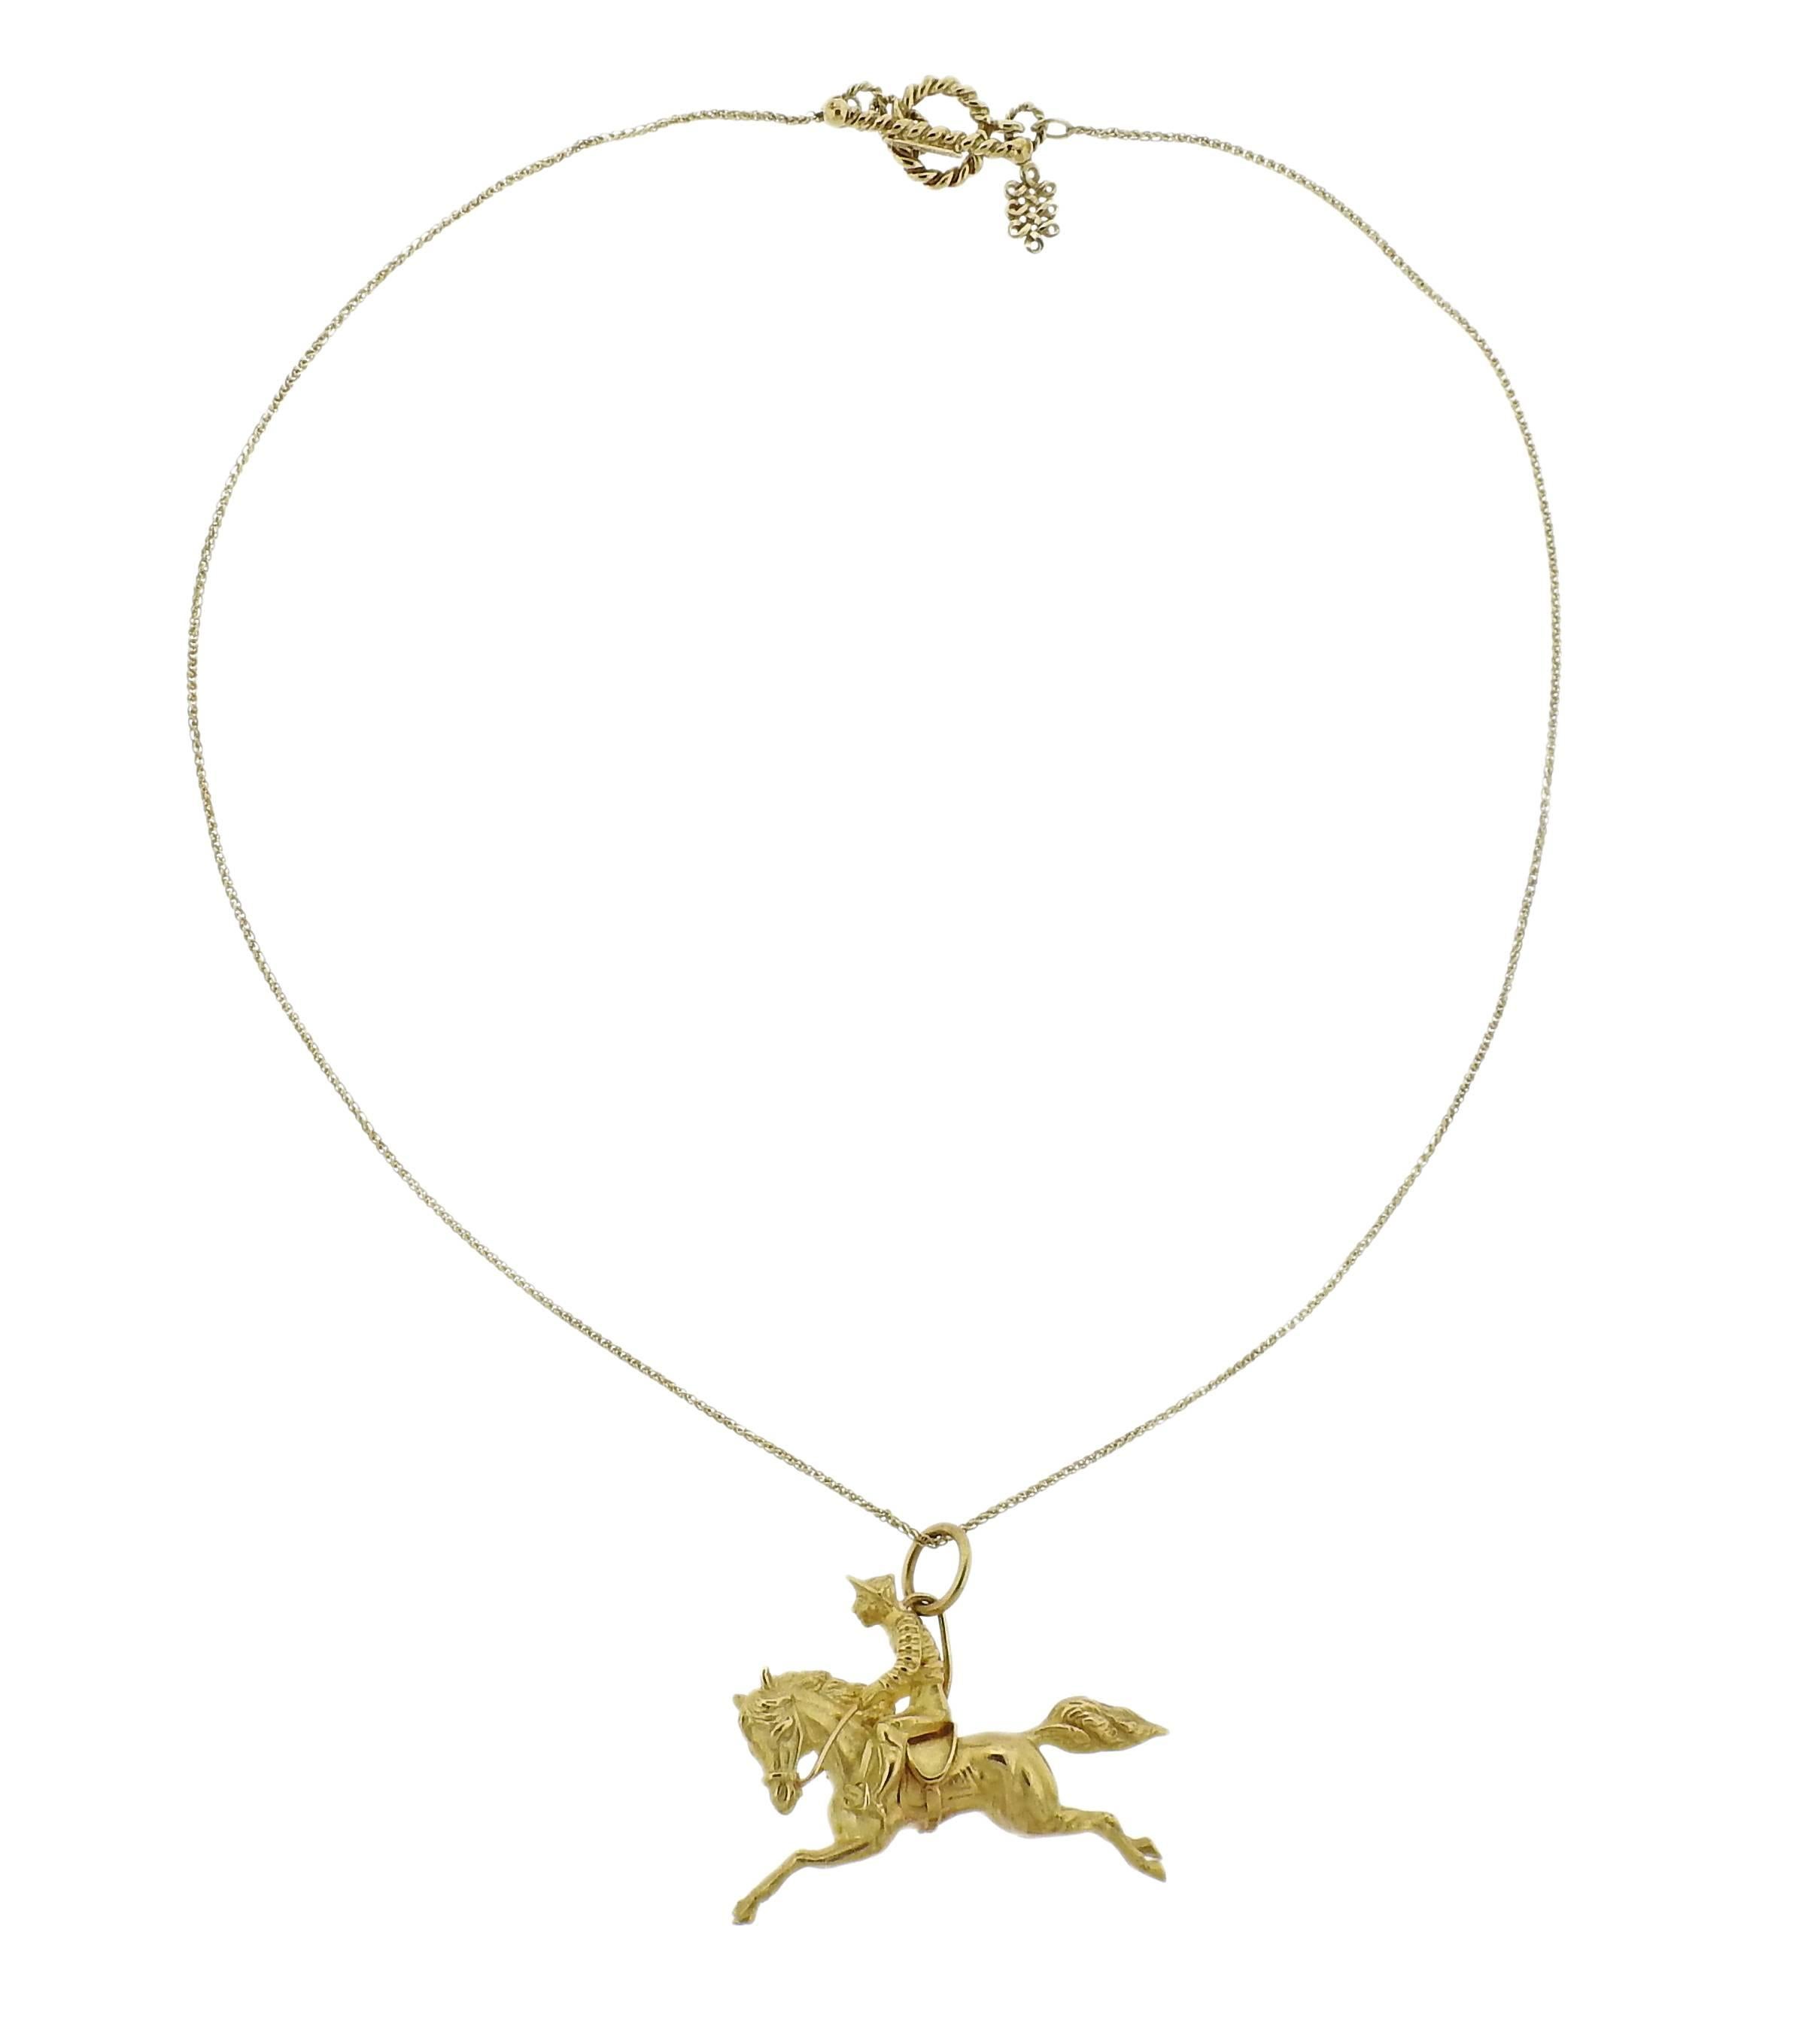 An 18k yellow gold necklace with Jockey pendant. Necklace is 16 3/4